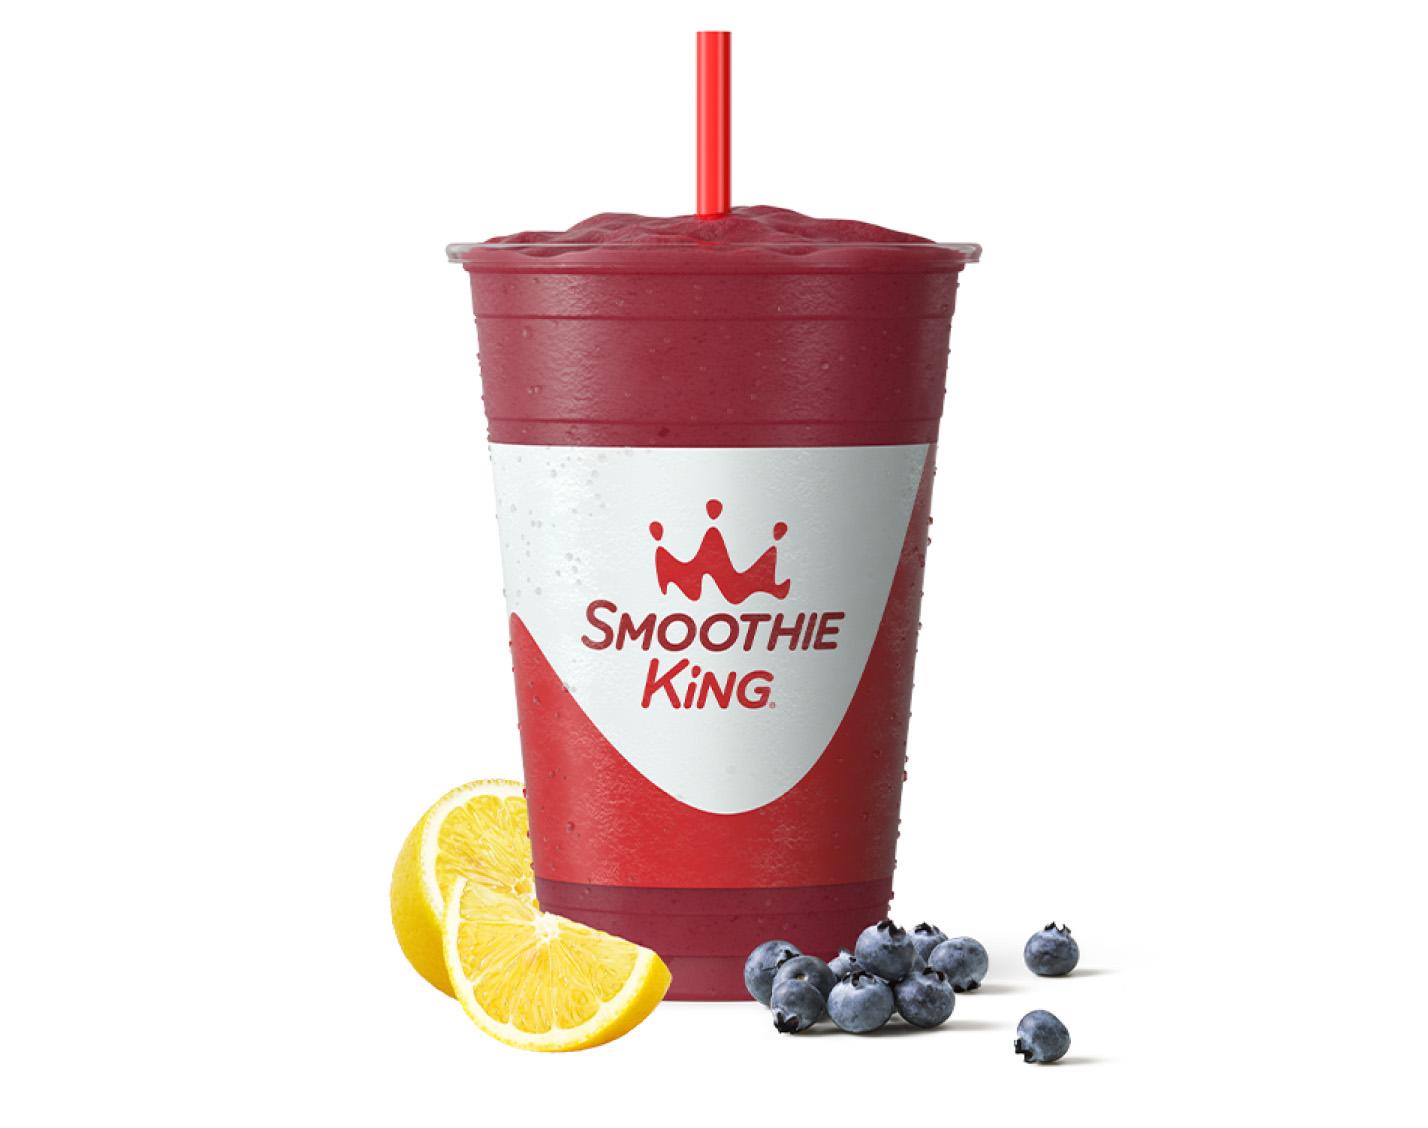 Free Smoothie King Blueberry Lemonade Smoothie on Wednesday June 19th